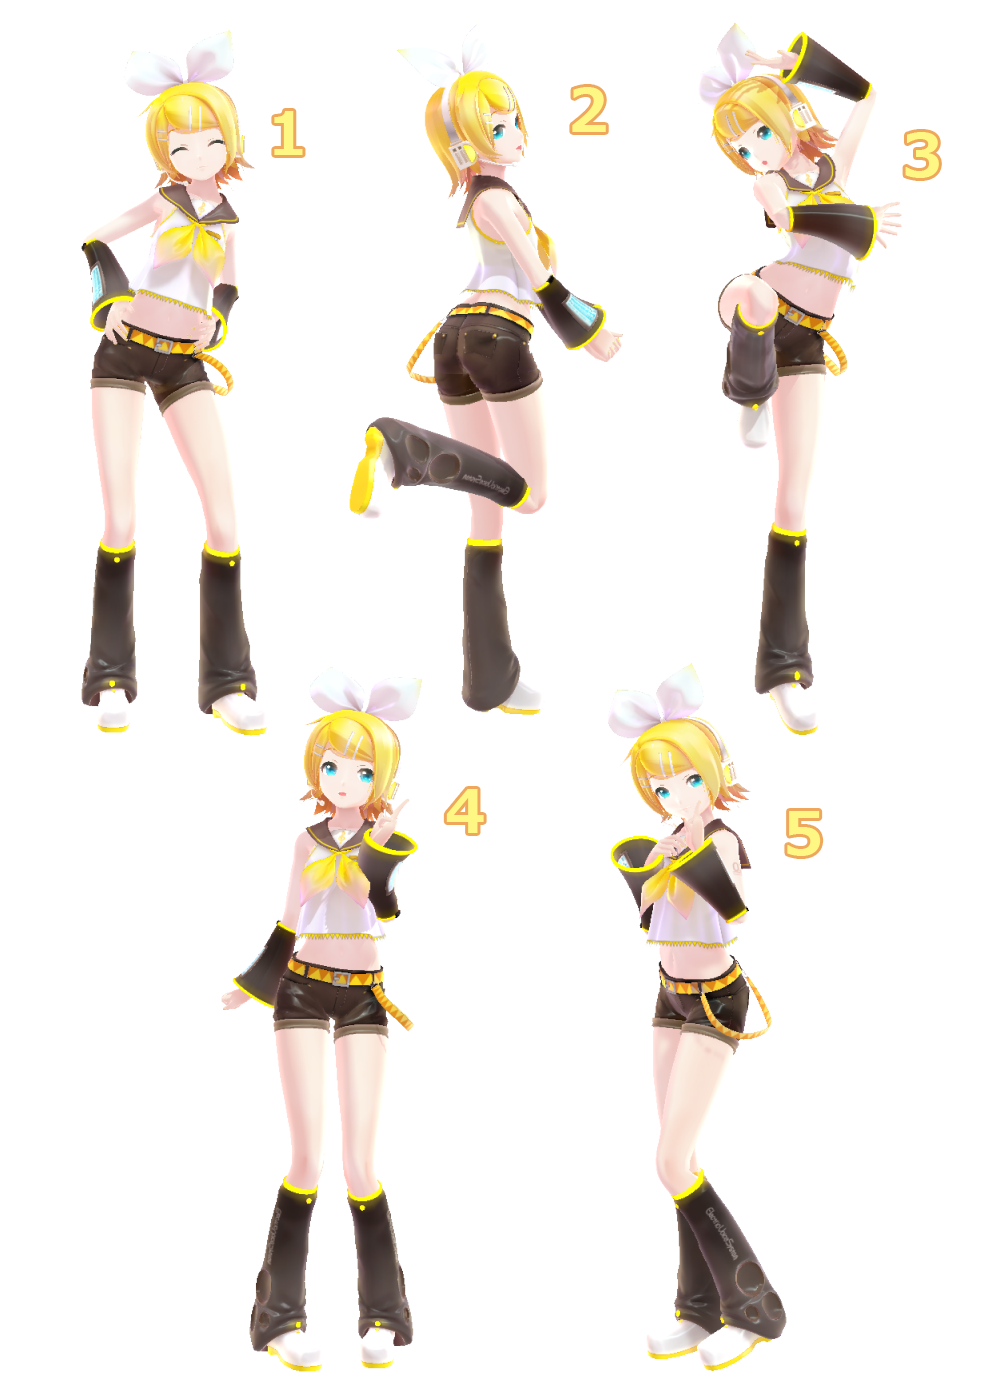 [MMD 100 Watchers Gift] Couple Dance Pose Pack DL! by 